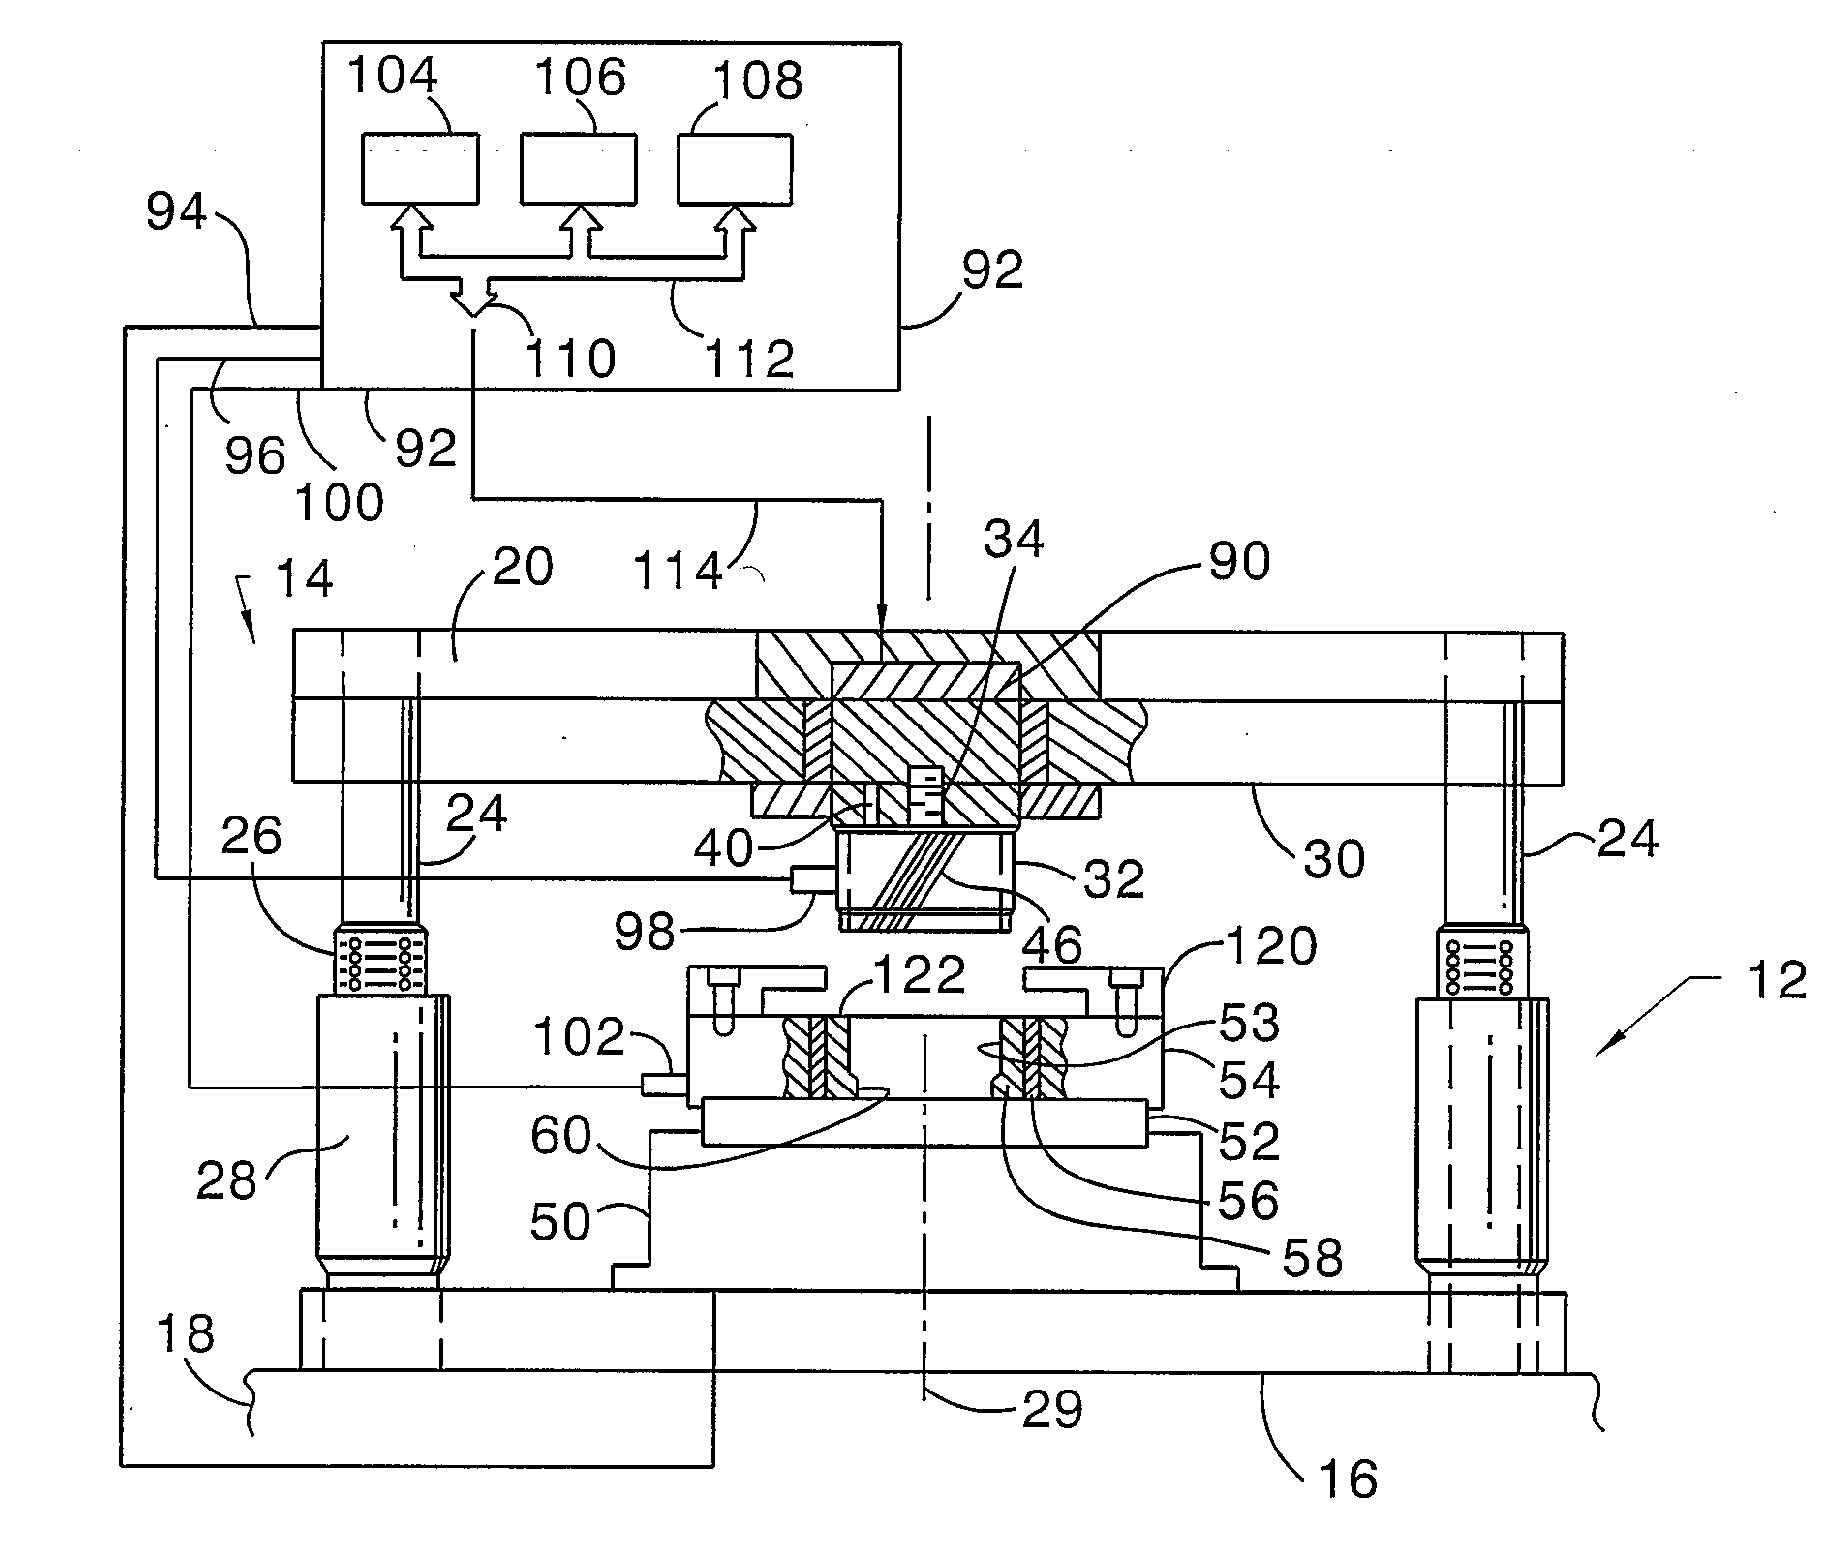 Servo motor for actuating a mandrel while extruding helical teeth